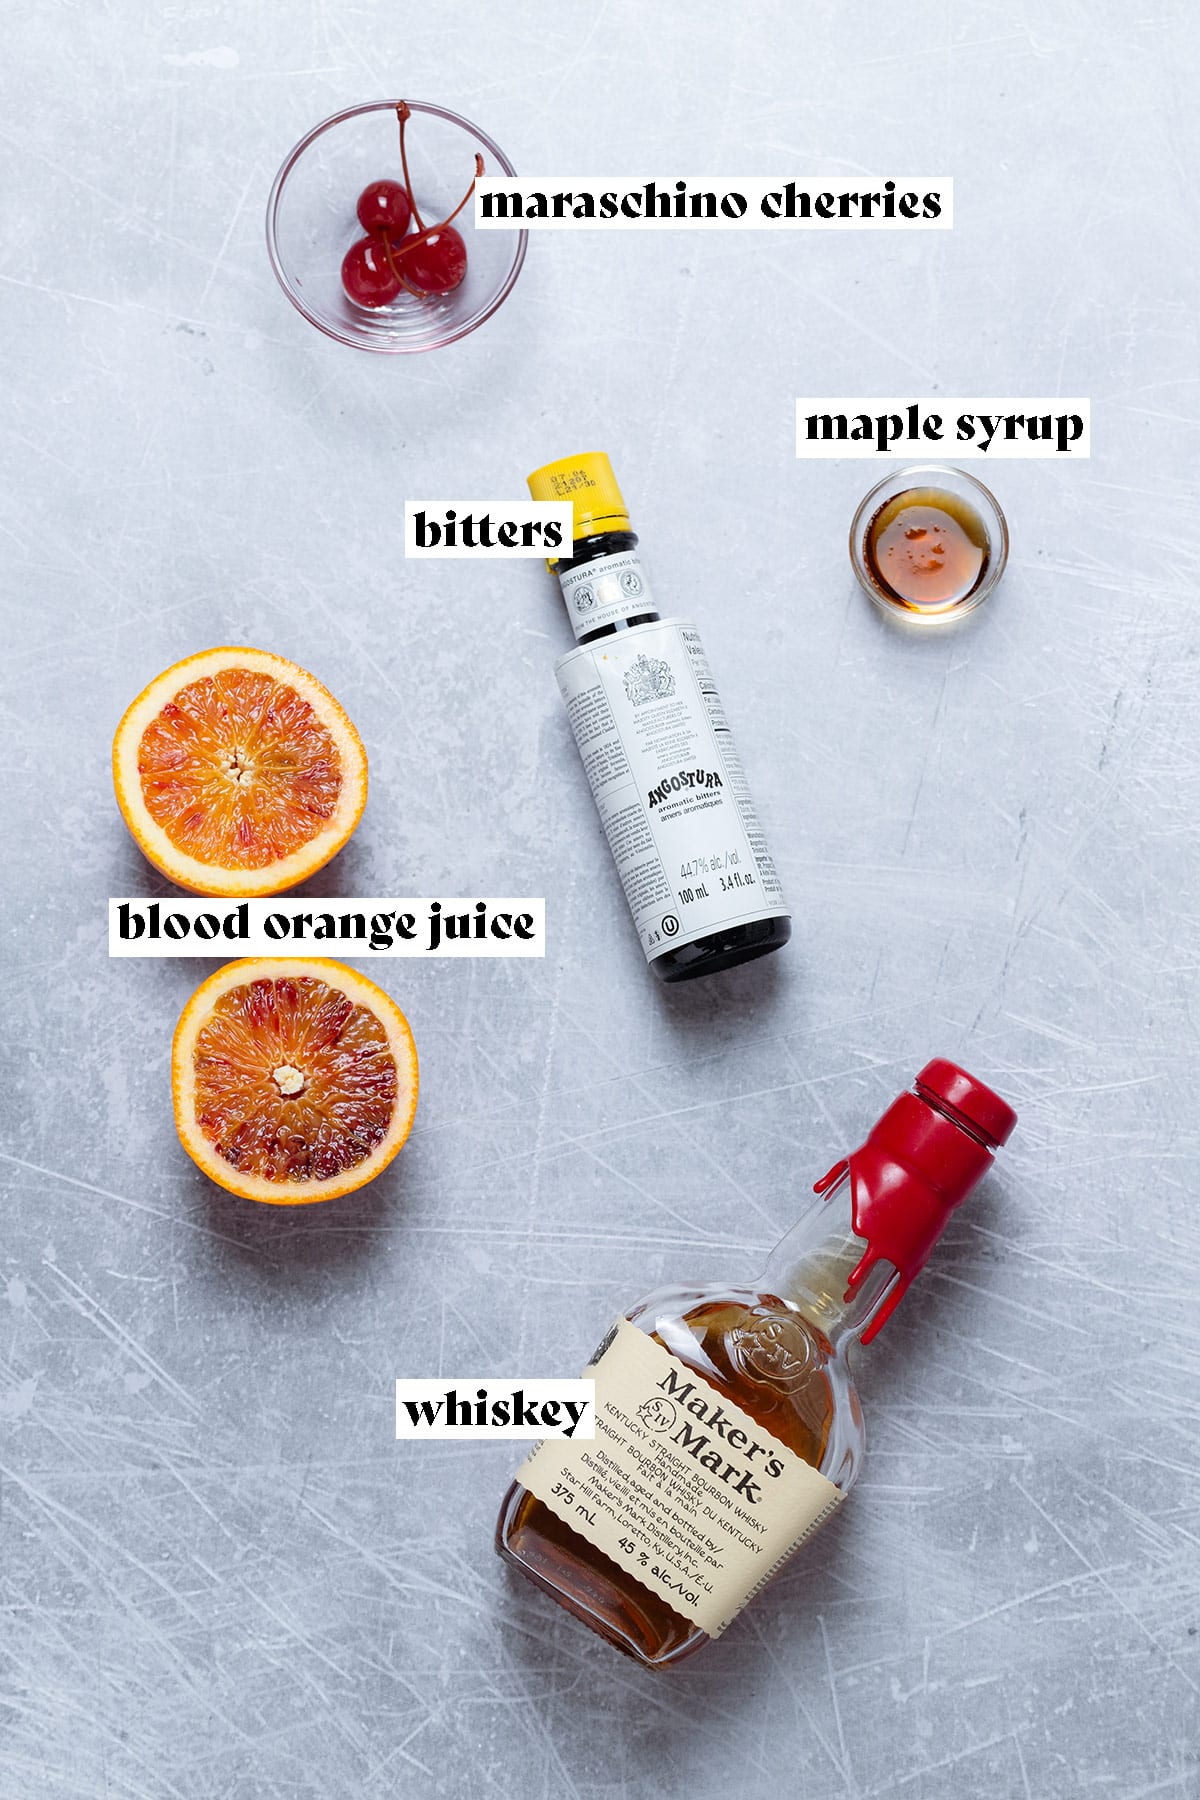 Ingredients for an orange old fashioned like whiskey, bitters, and fresh orange laid out on a grey background.